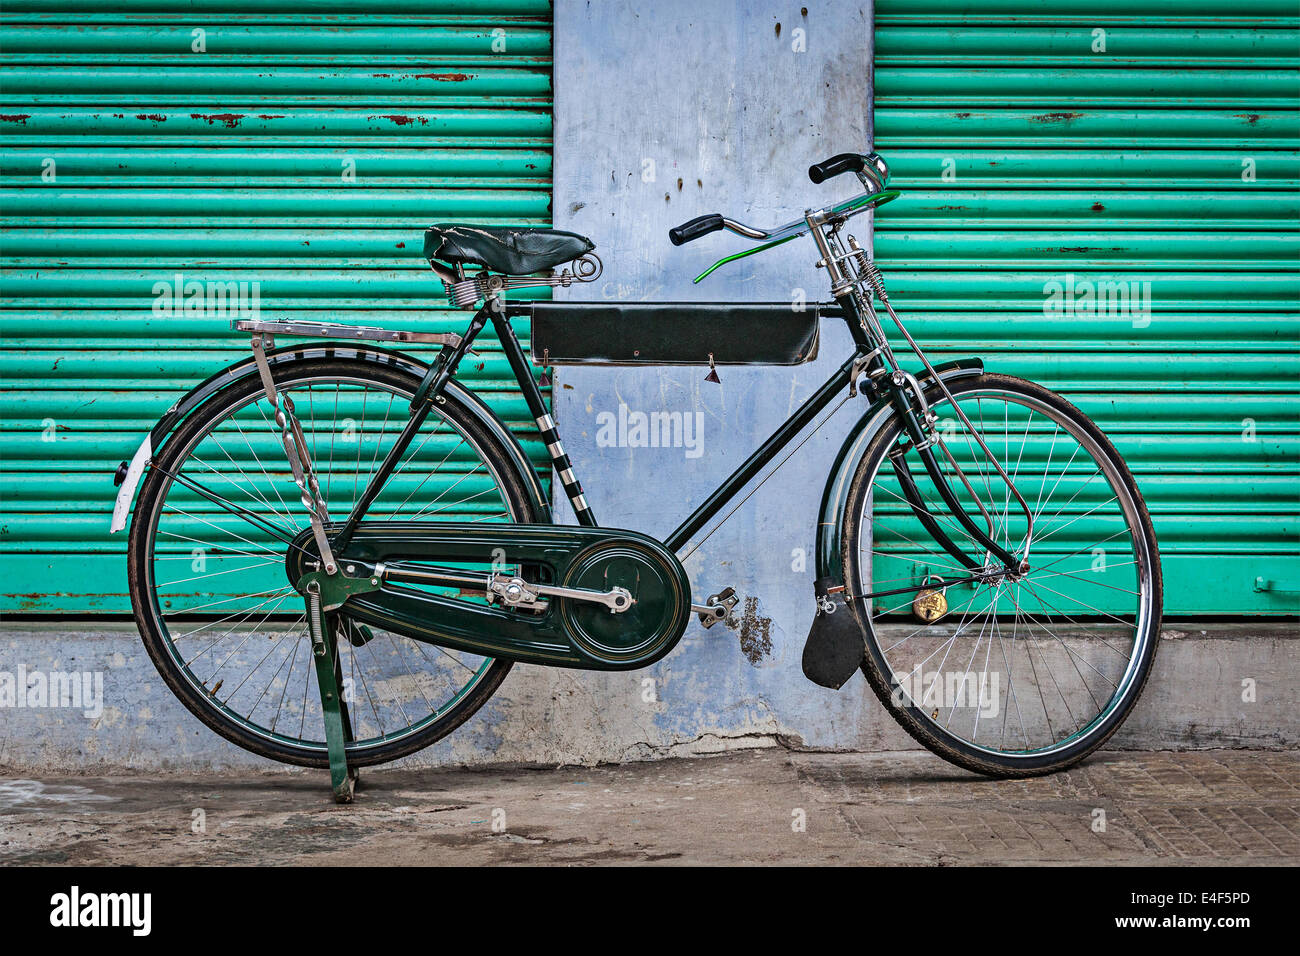 Old Indian bicycle in the street of India Stock Photo